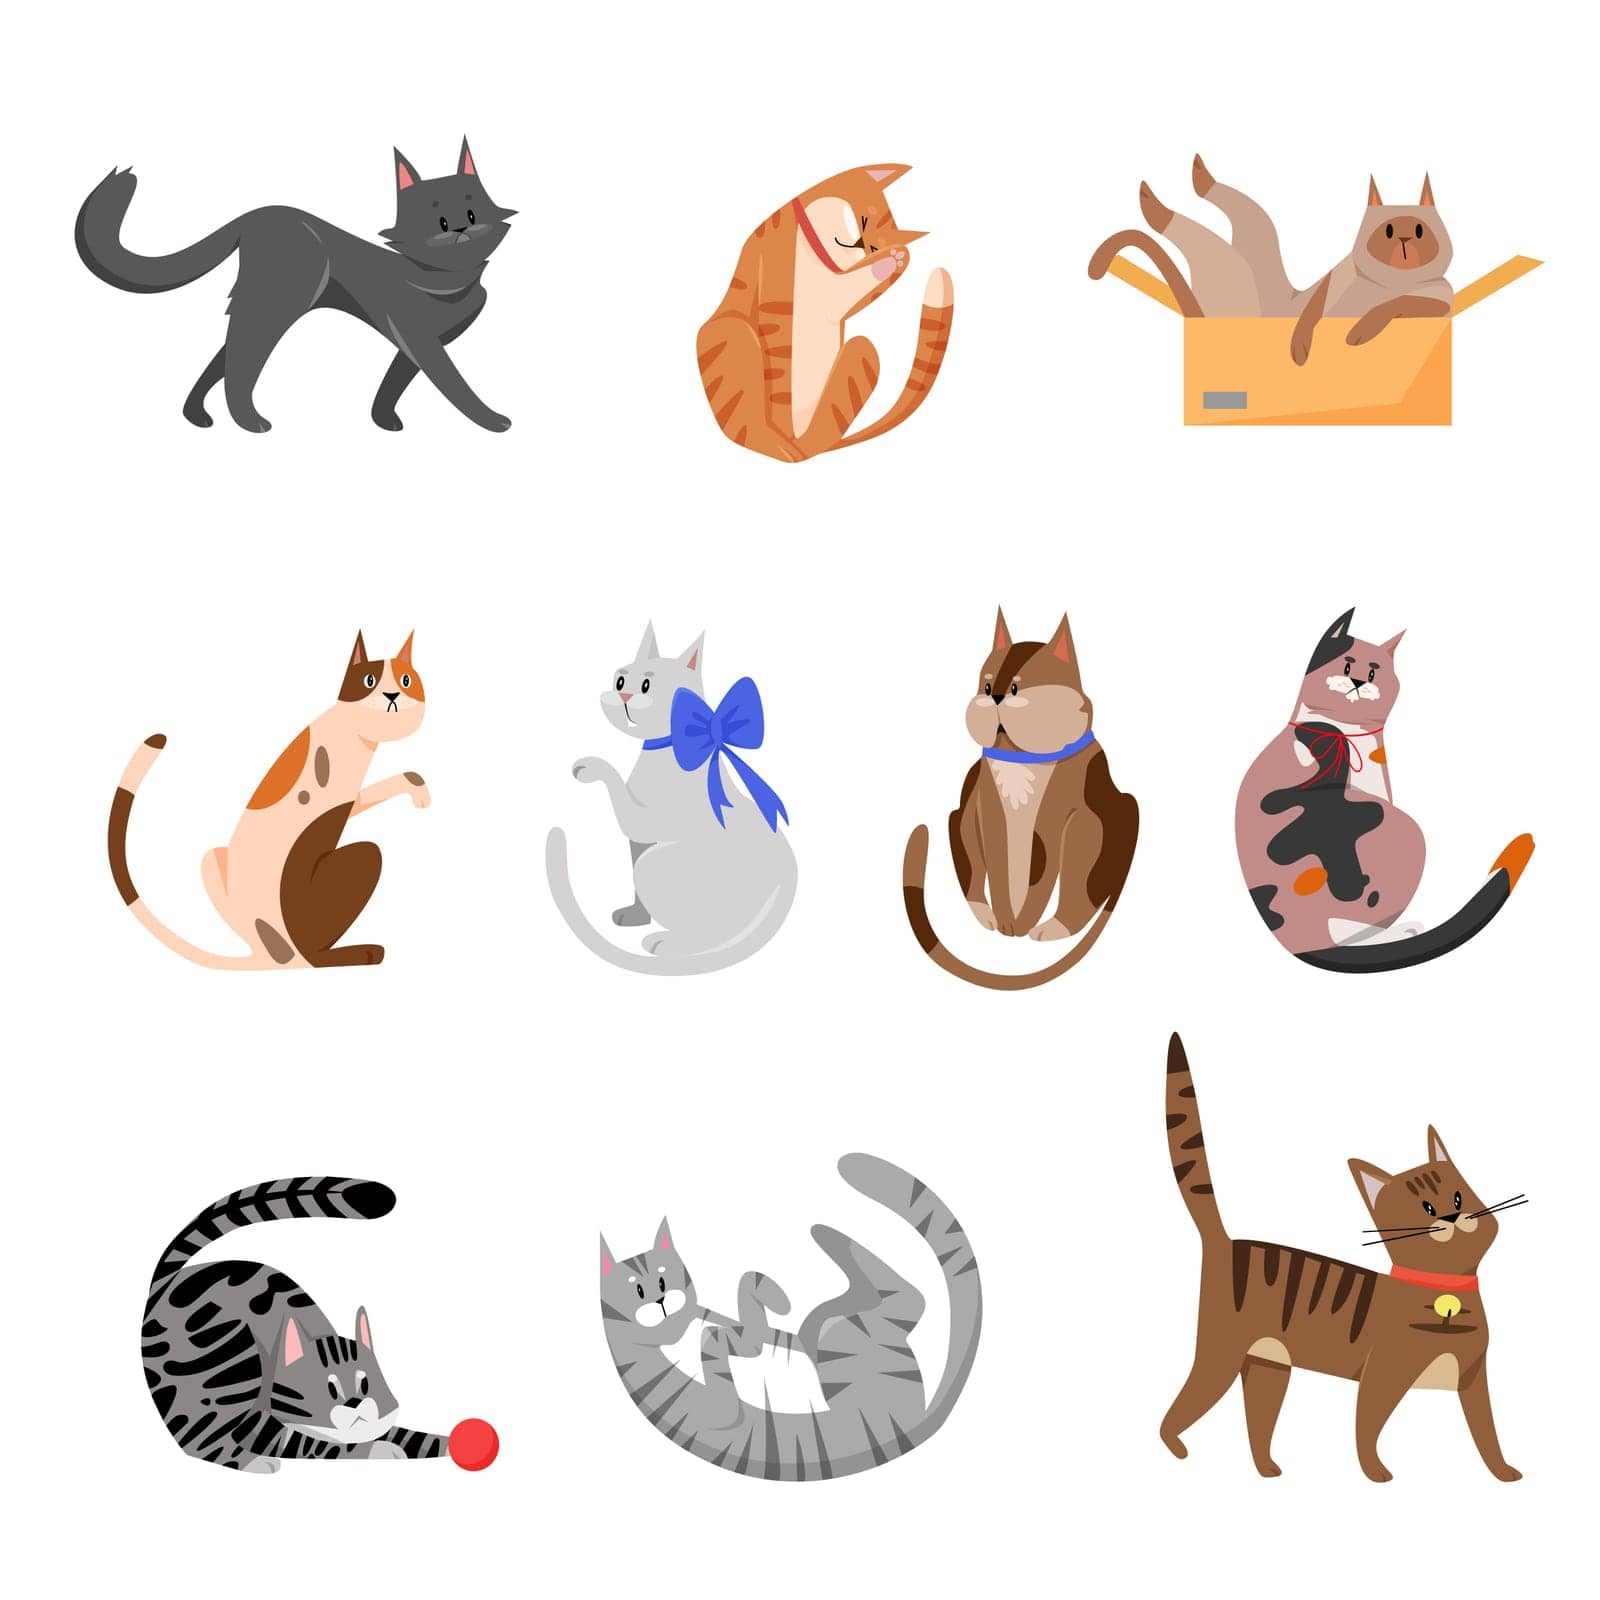 Purebred cats, playful pets vector illustrations set by Popov